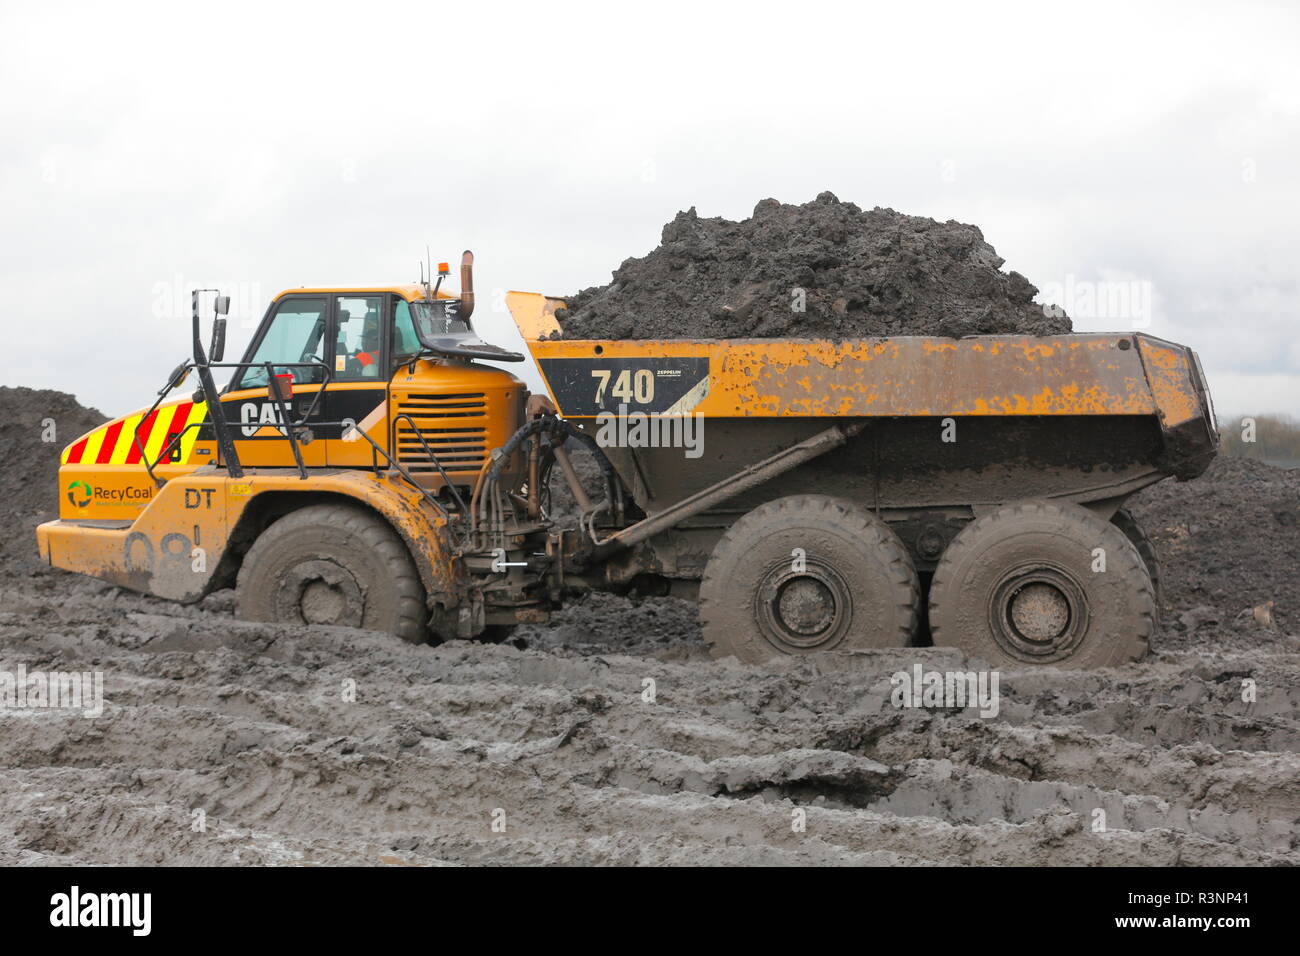 A Caterpillar 740 Articulated Dump Truck working on site at Recycoal Coal Recycling Plant in Rossington,Doncaster which has now been demolished. Stock Photo